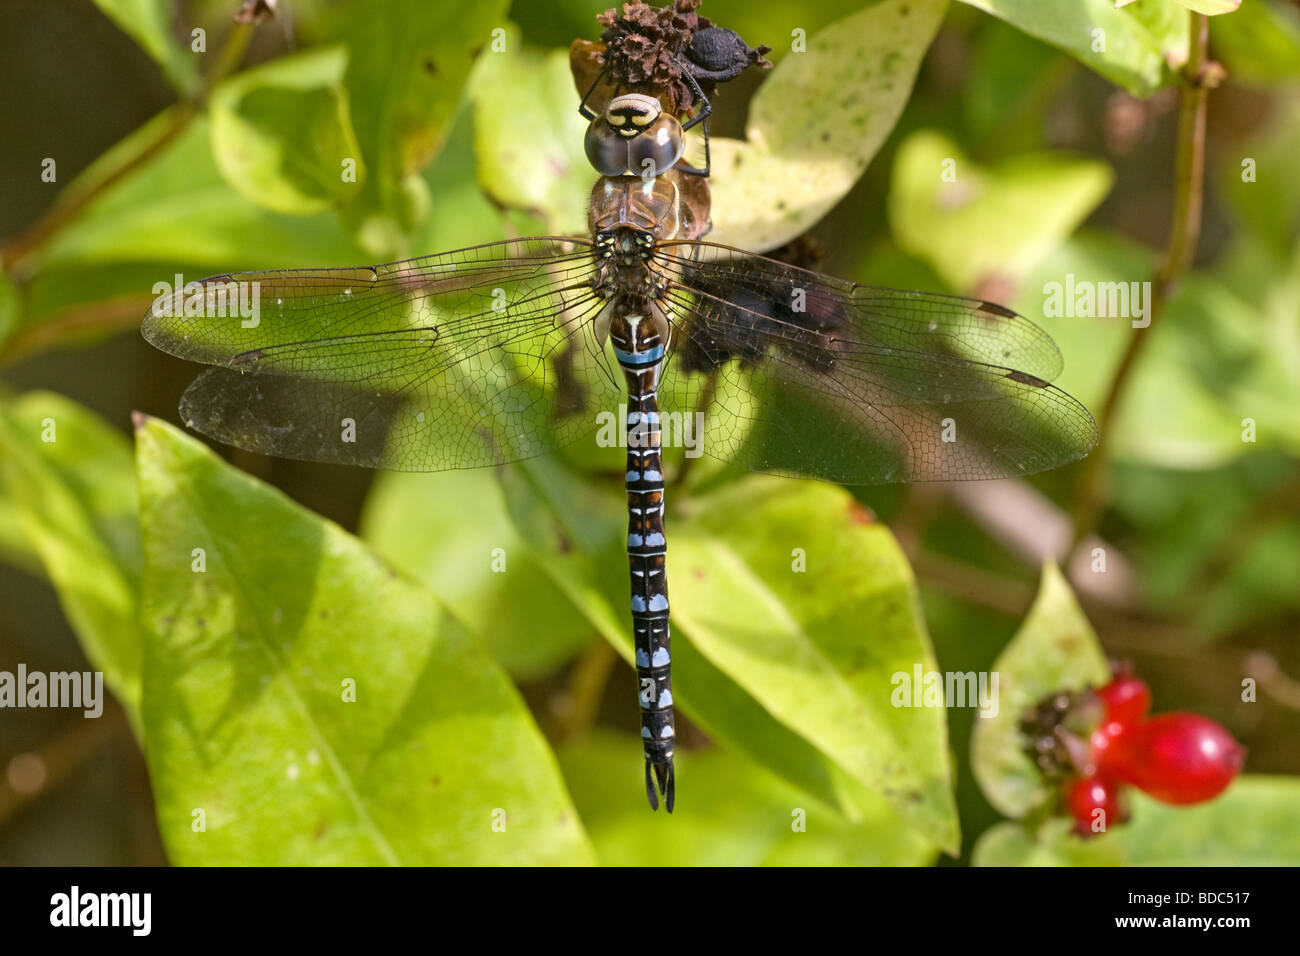 A male Migrant Hawker Dragonfly (Aeshna mixta) settled on a Honeysuckle plant Stock Photo